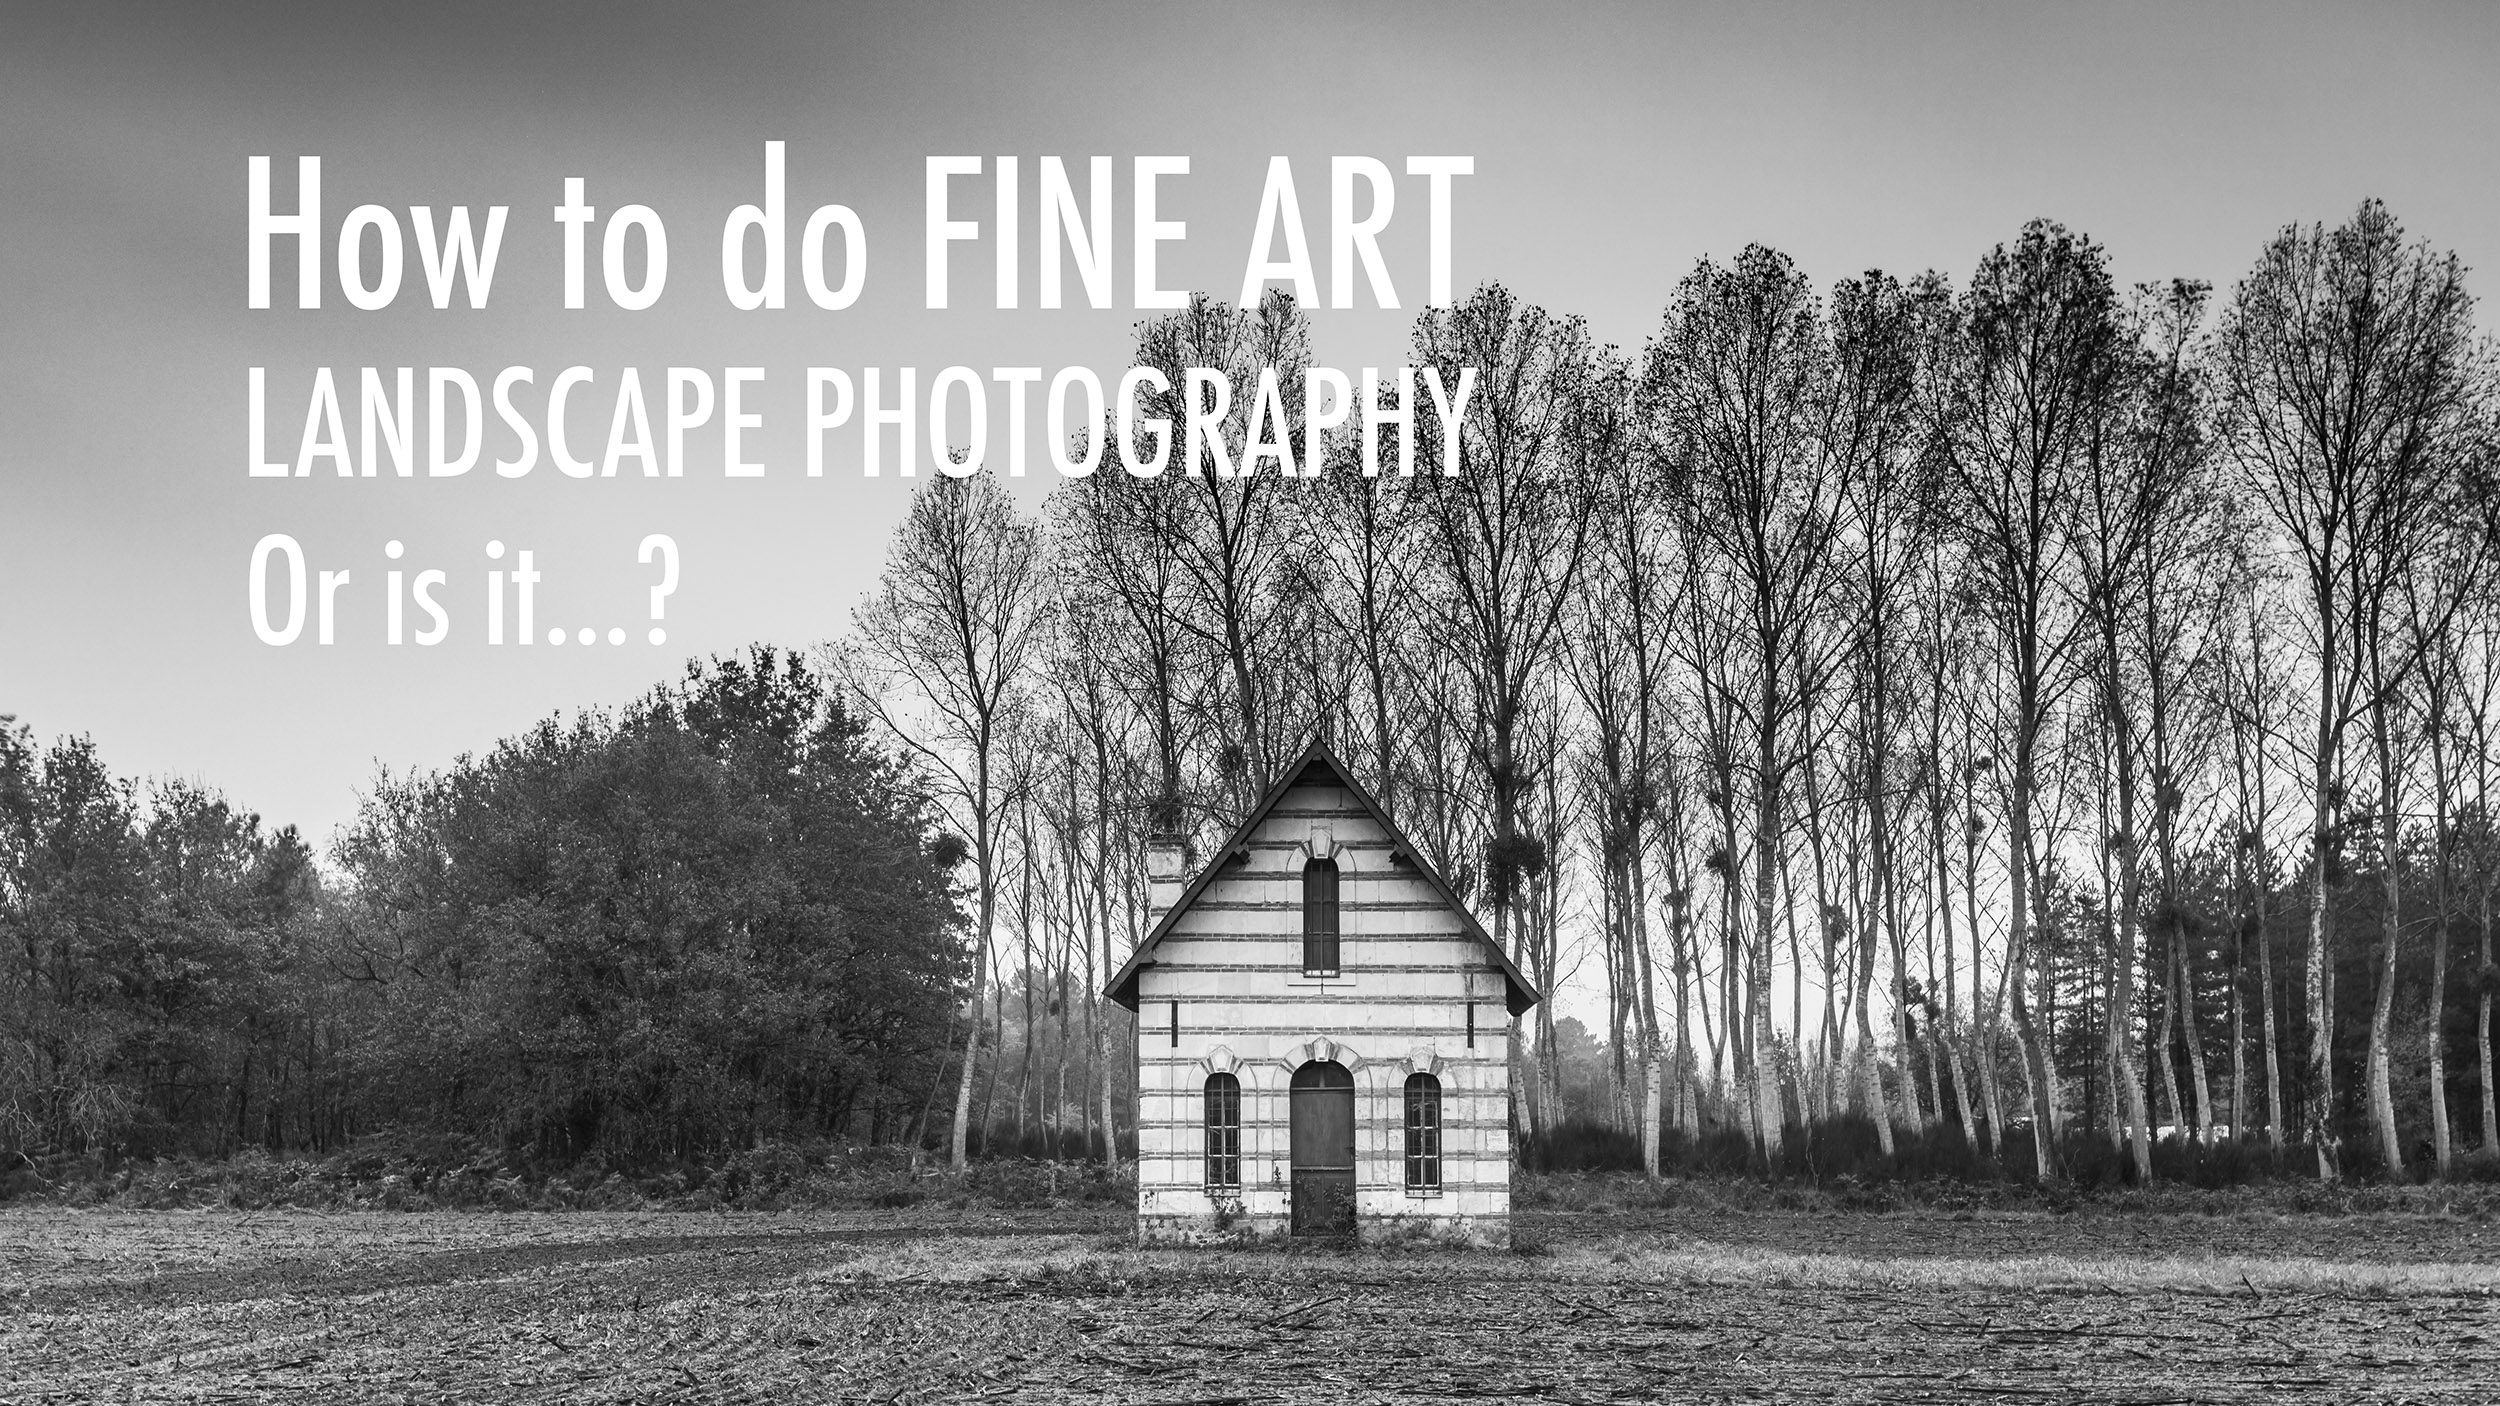 How to do fine art landscape photography